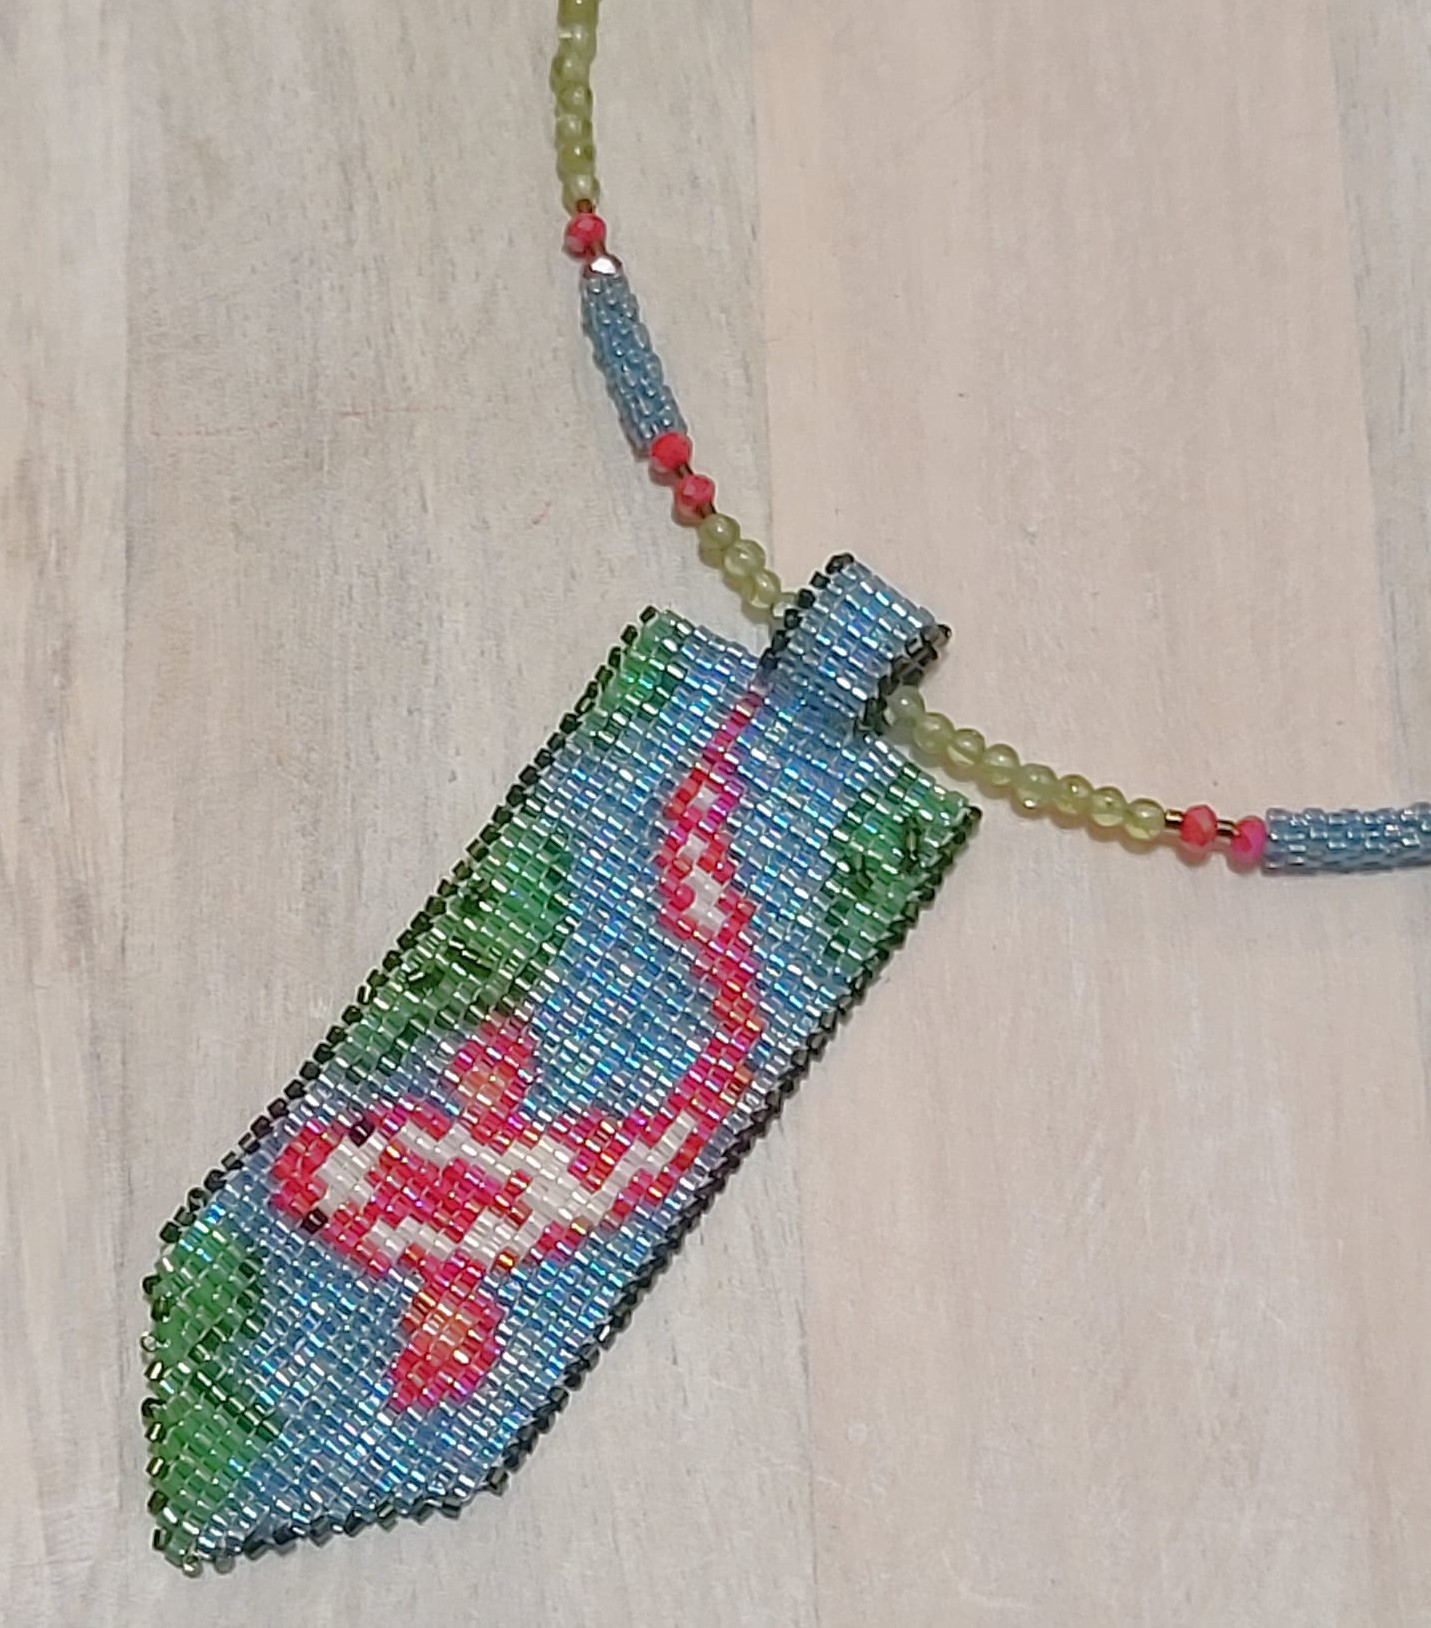 Koi Fish Hand Stitched Pendant Necklace w/Jade Gems Accents